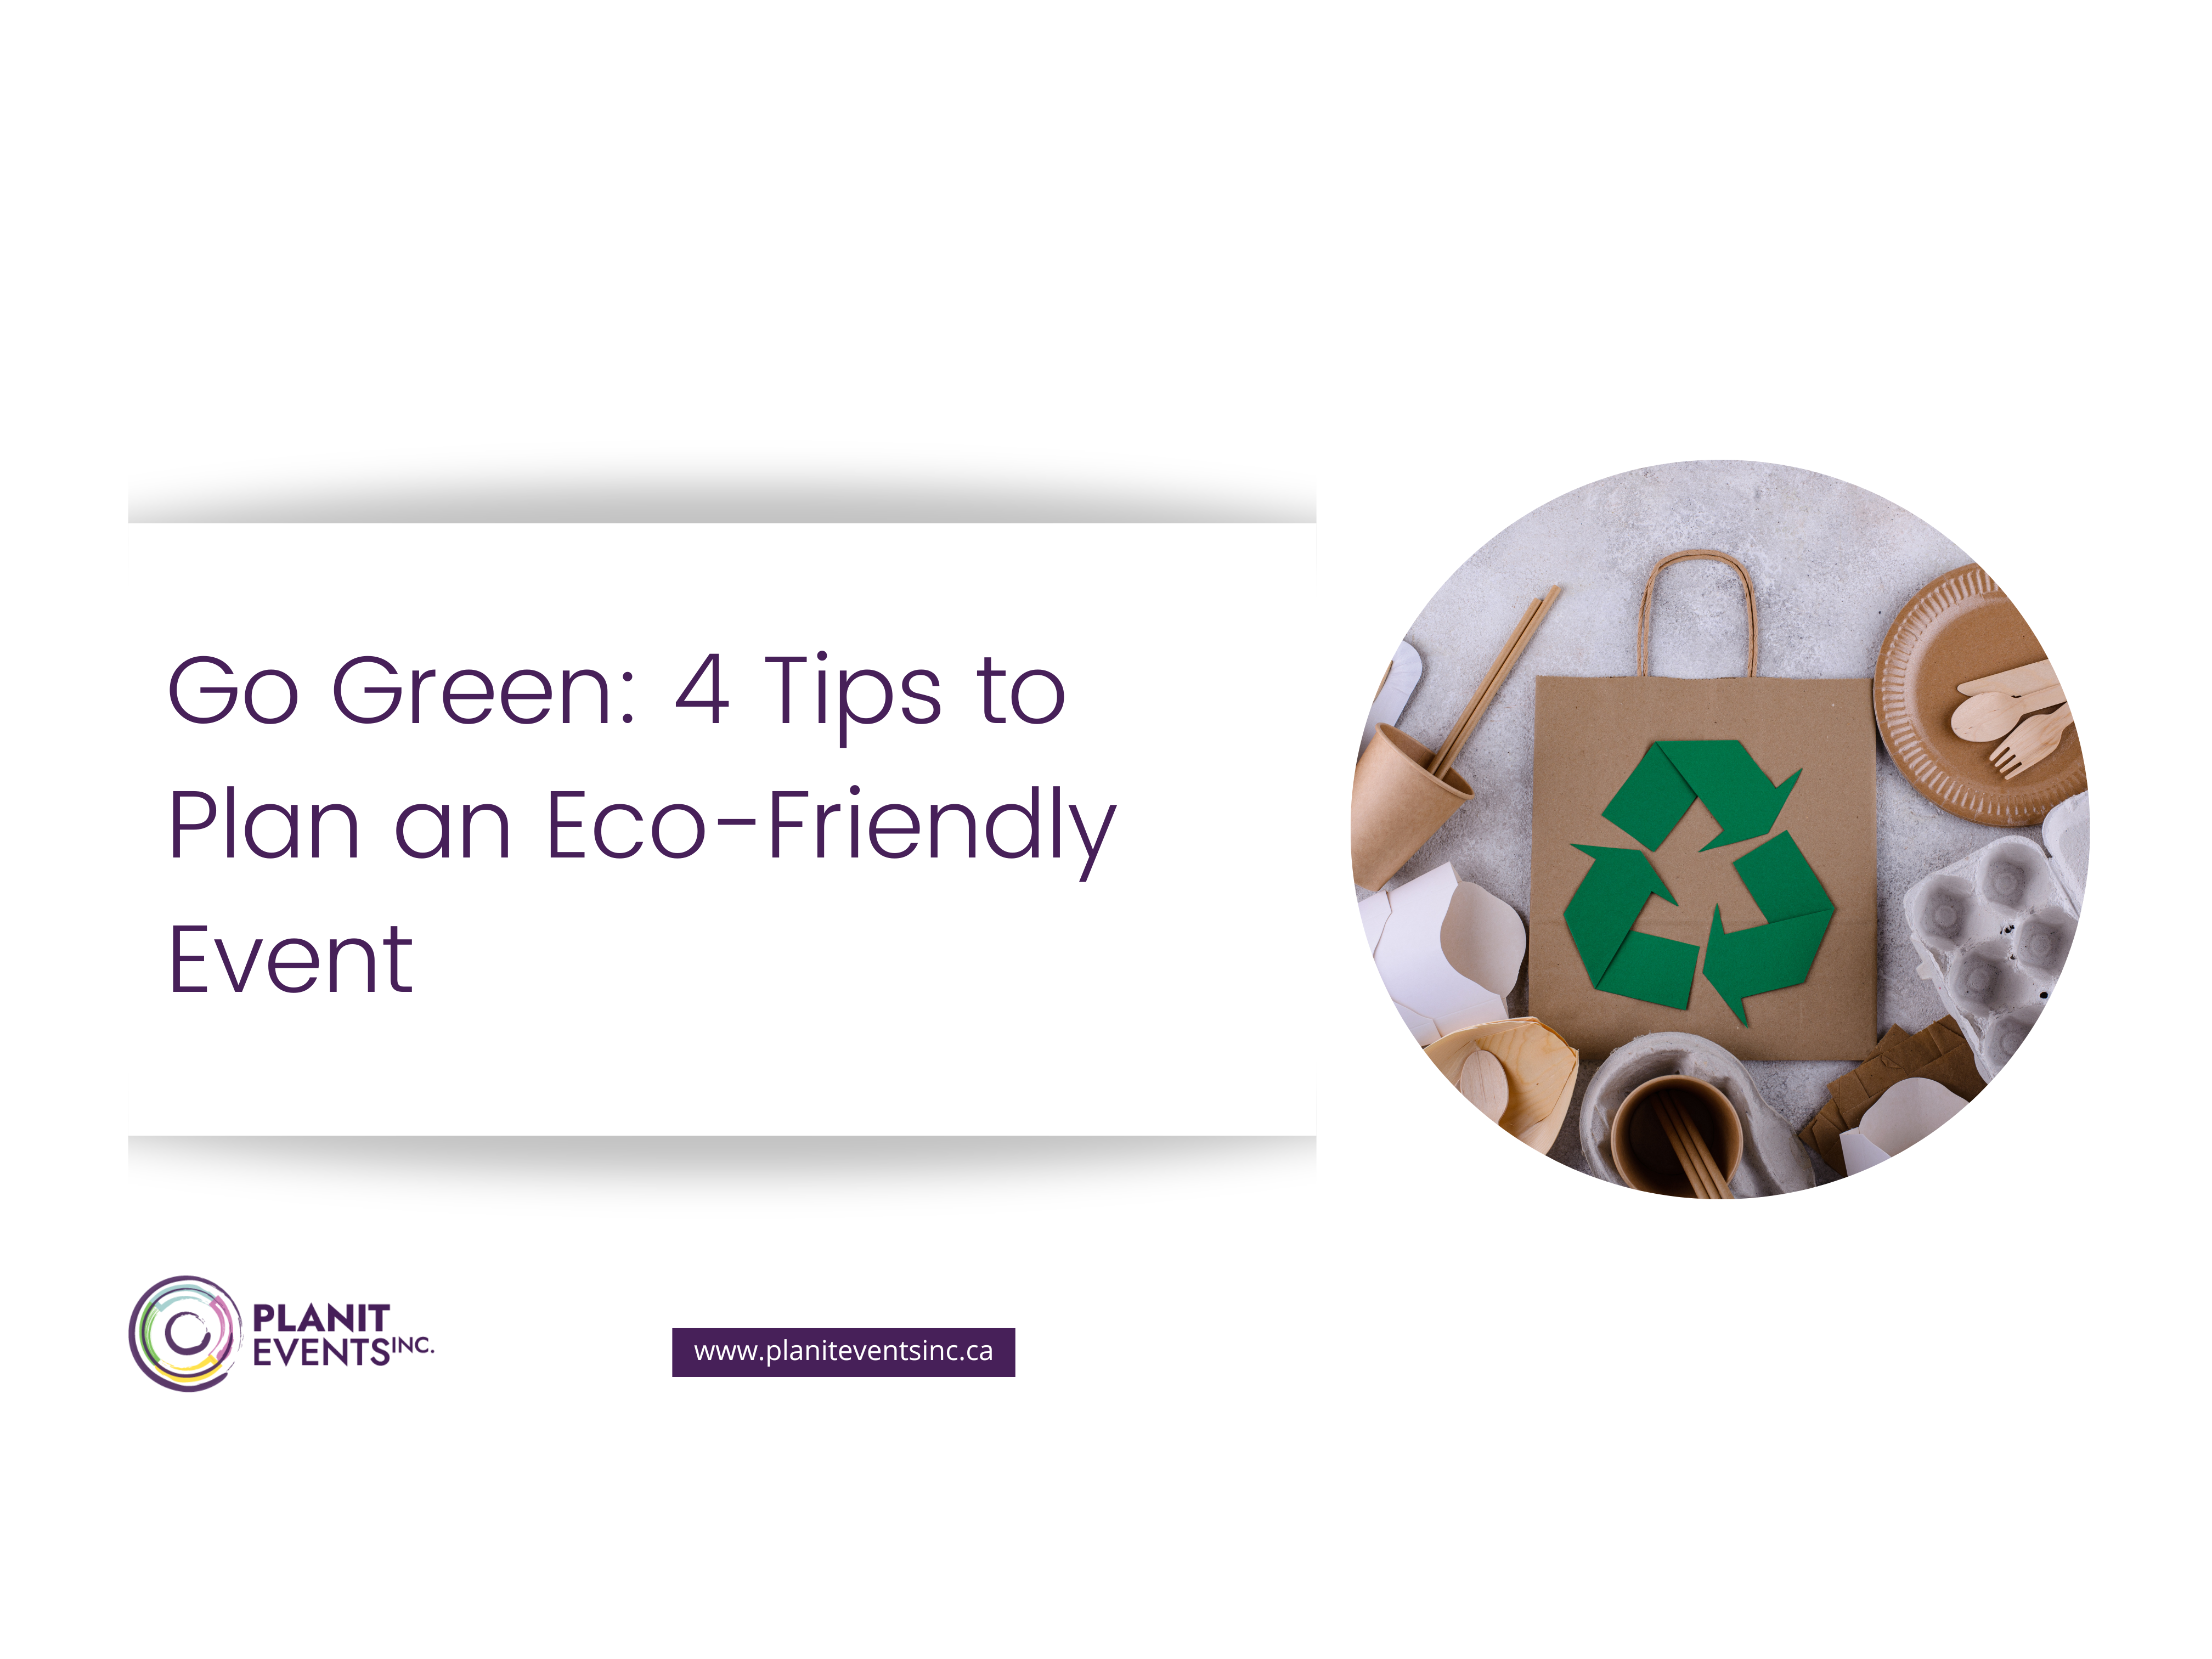 Go Green 4 Tips to Plan an Eco-Friendly Event